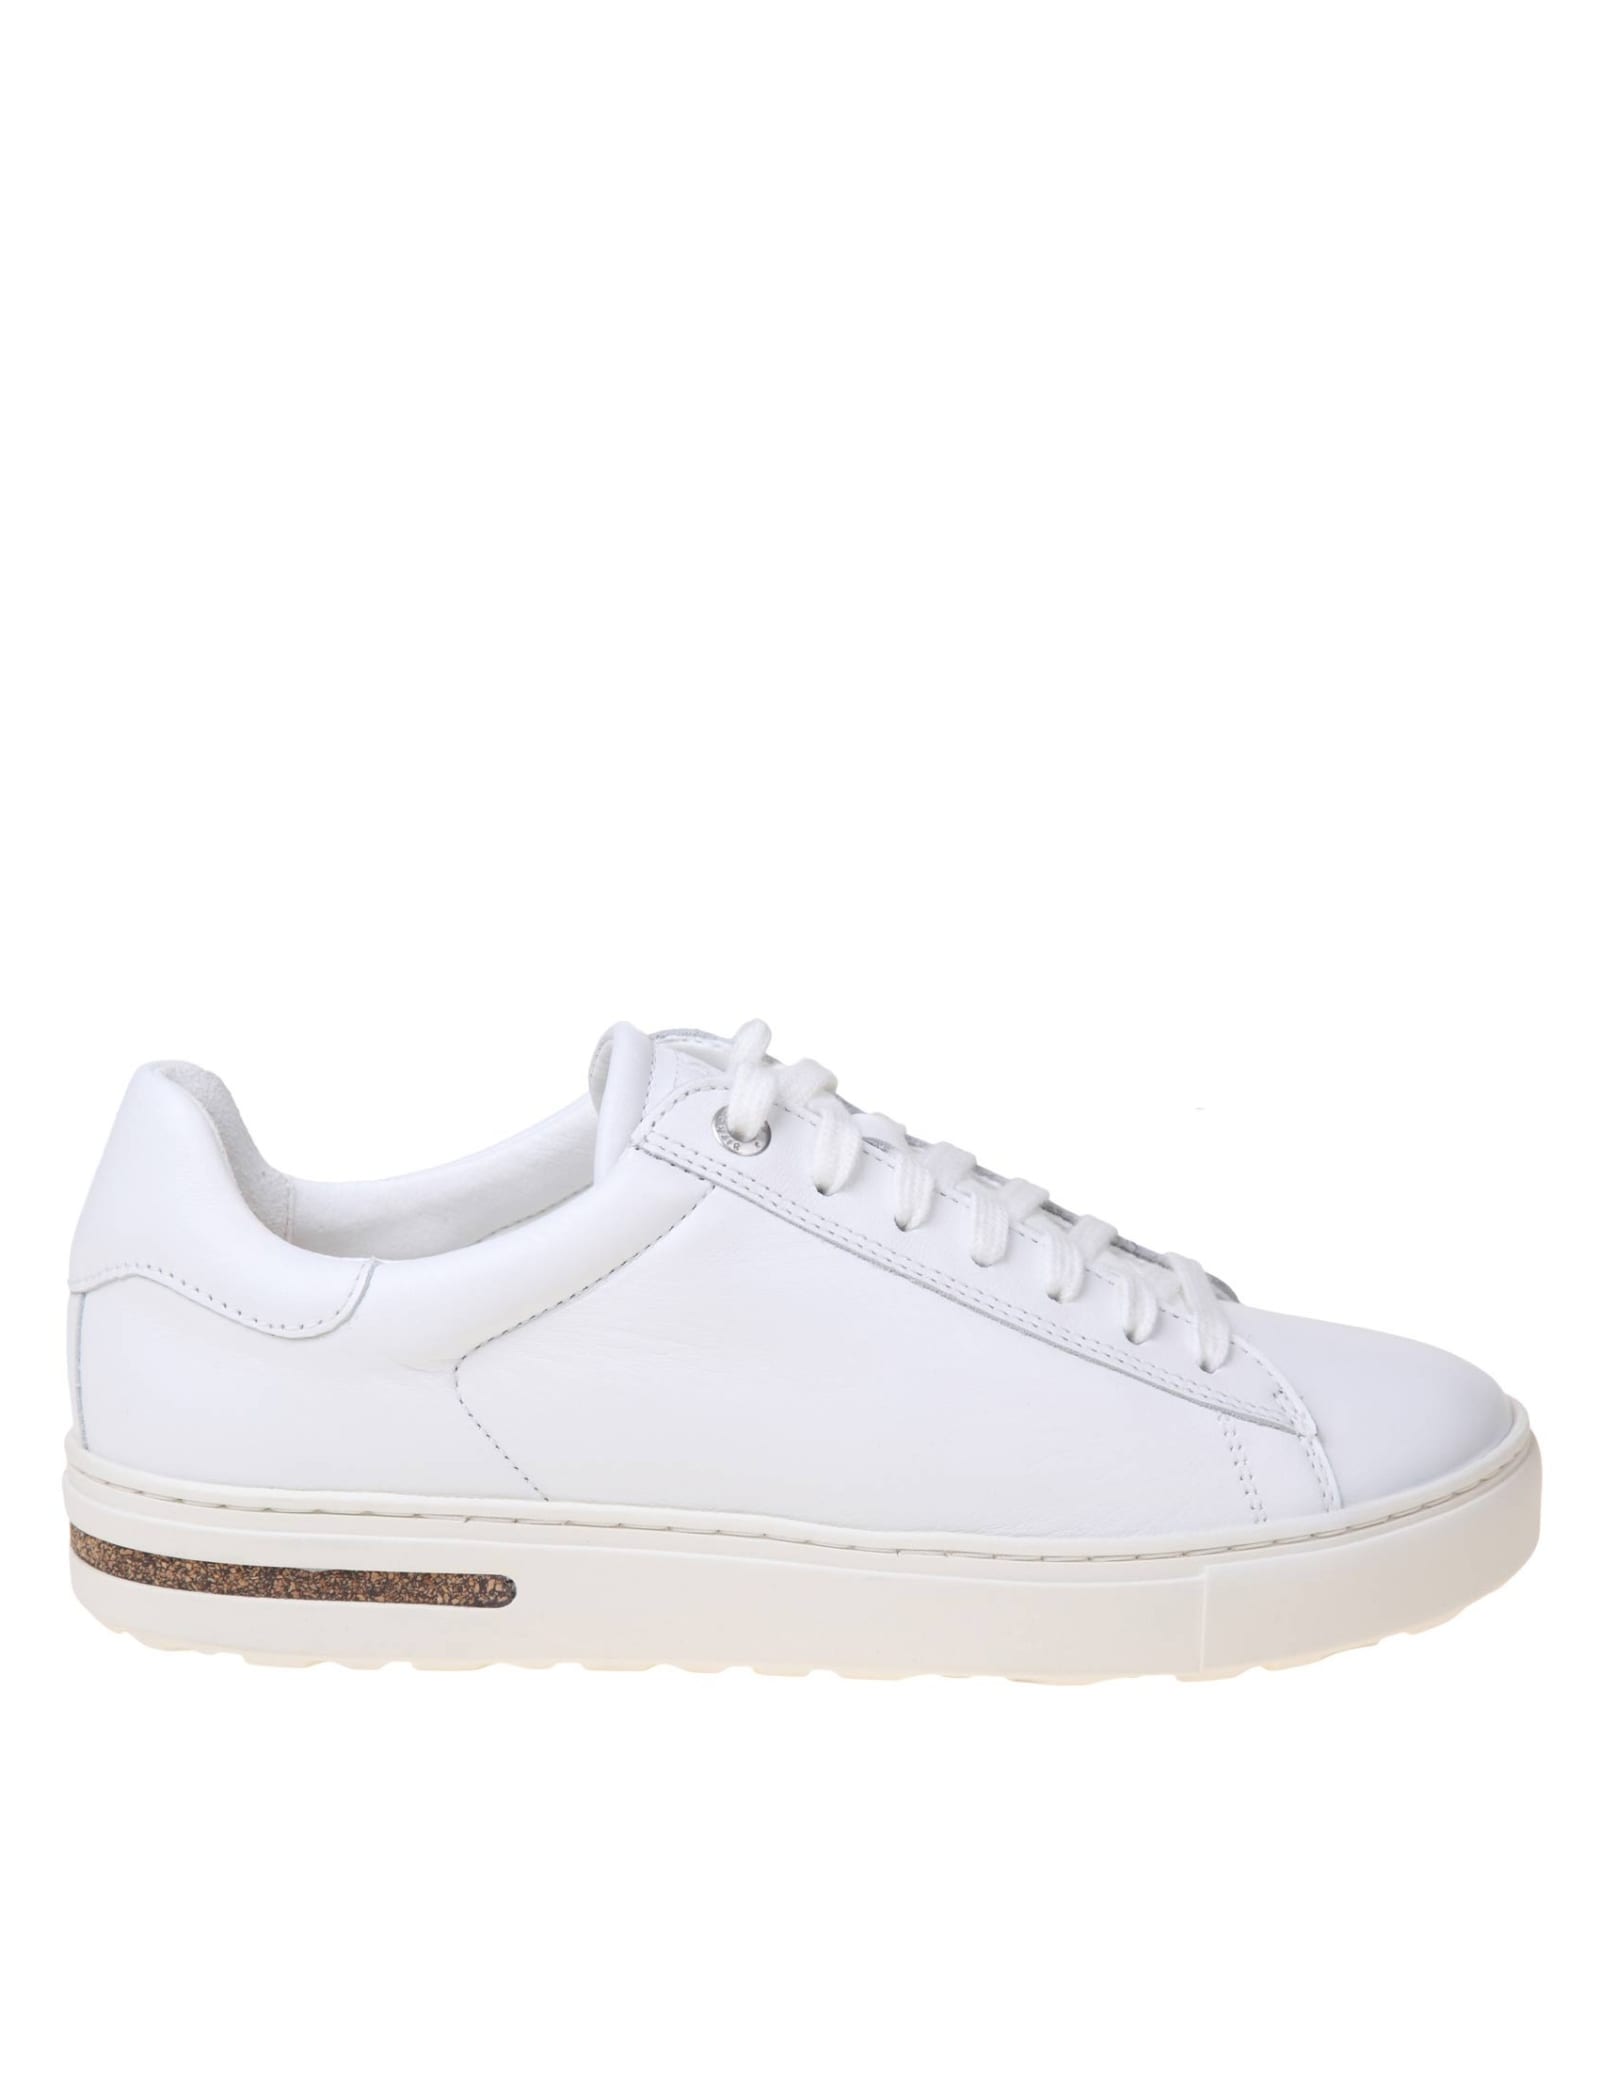 Bend Low Sneakers In White Leather